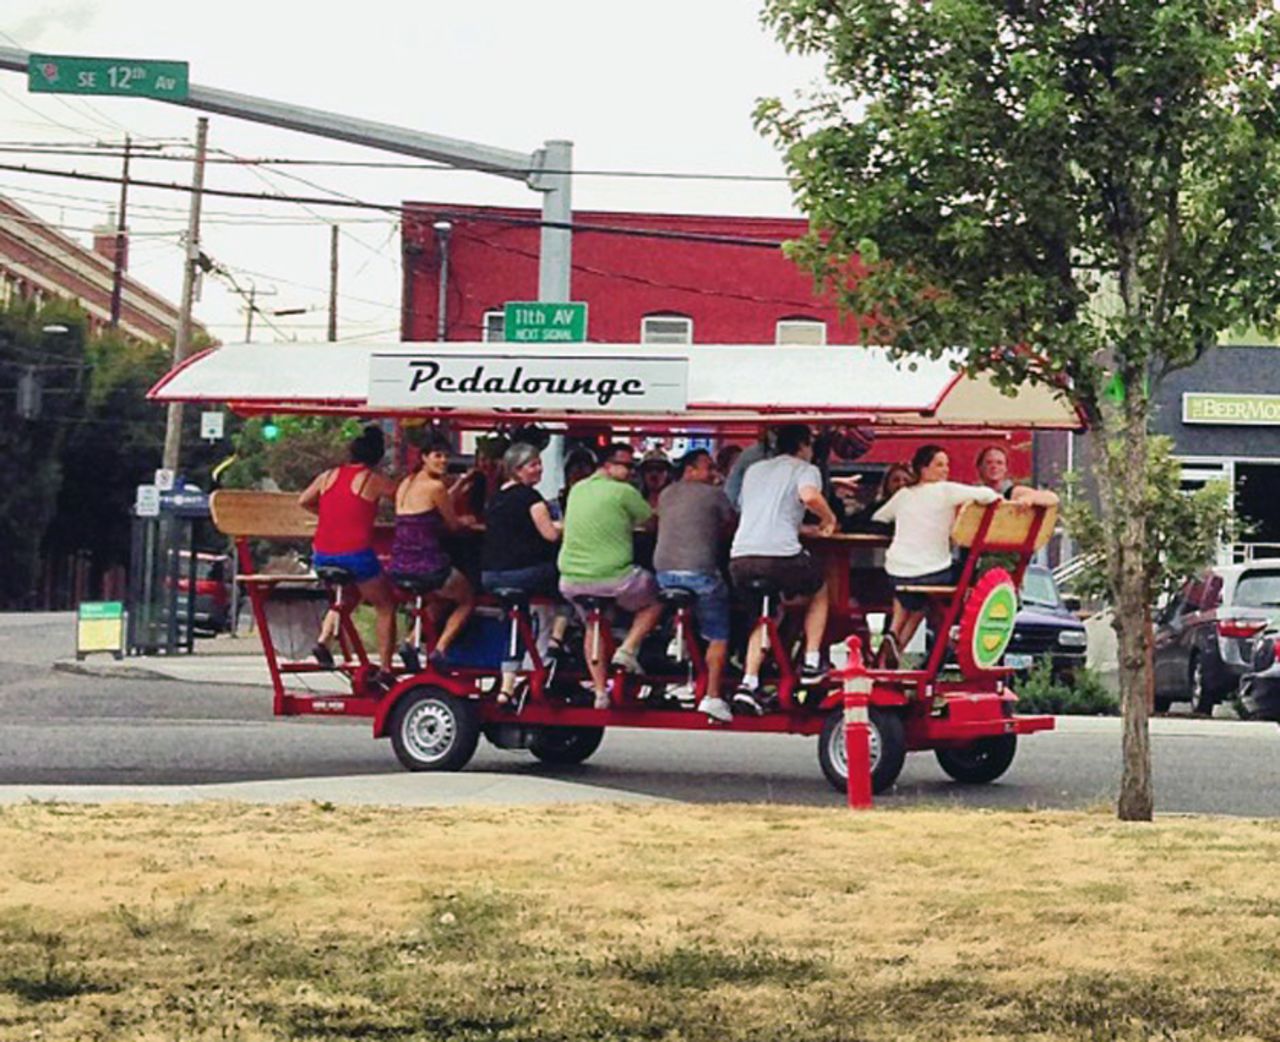 Pedalounge is another way to do a Portland beer tour. Don't worry, after a few stops, you won't feel so conspicuous.  